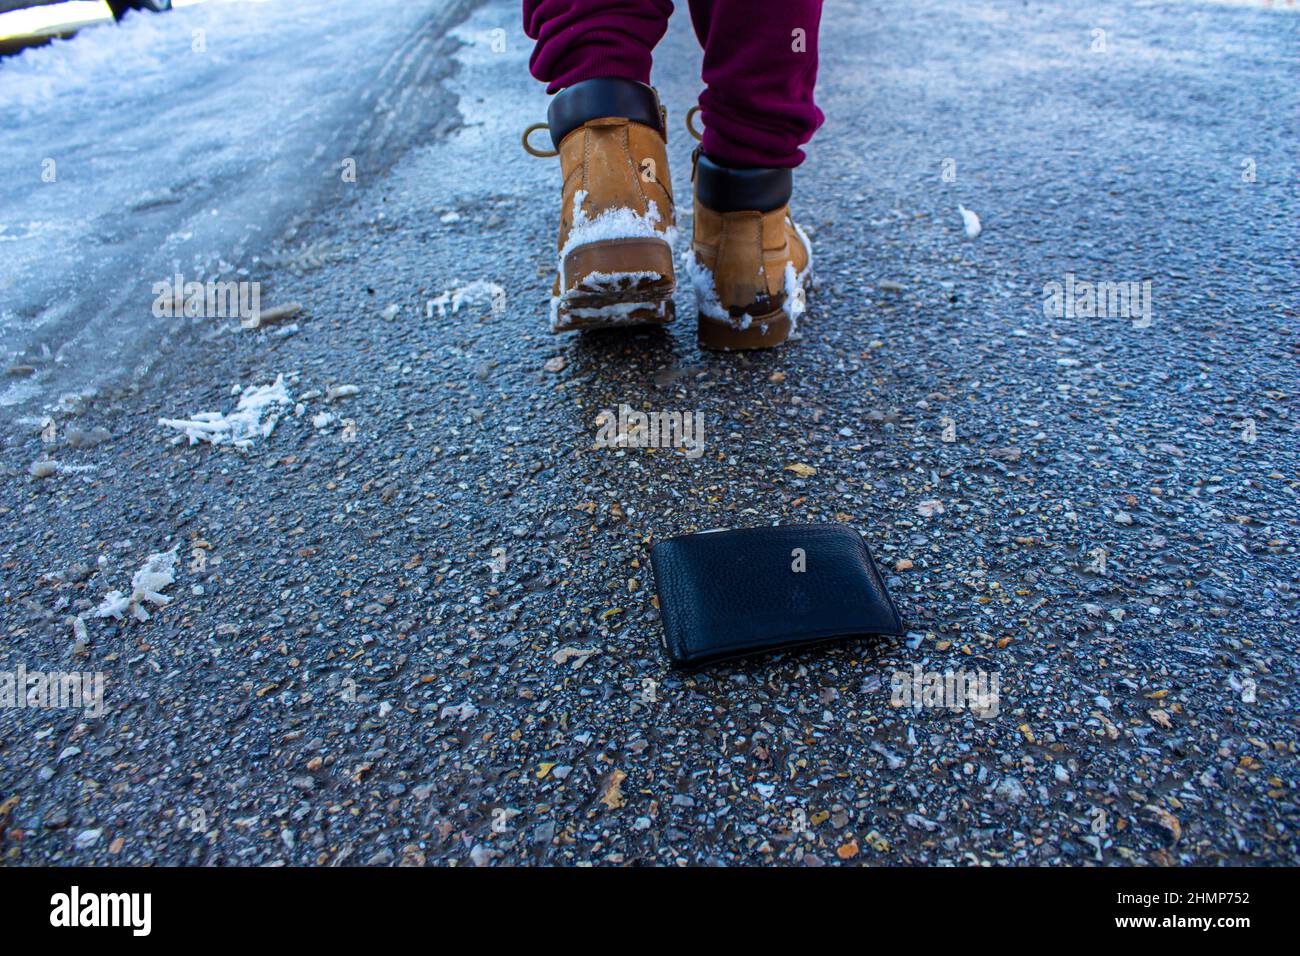 Man dropping his wallet on the road. Concept of losing wallet. Stock Photo